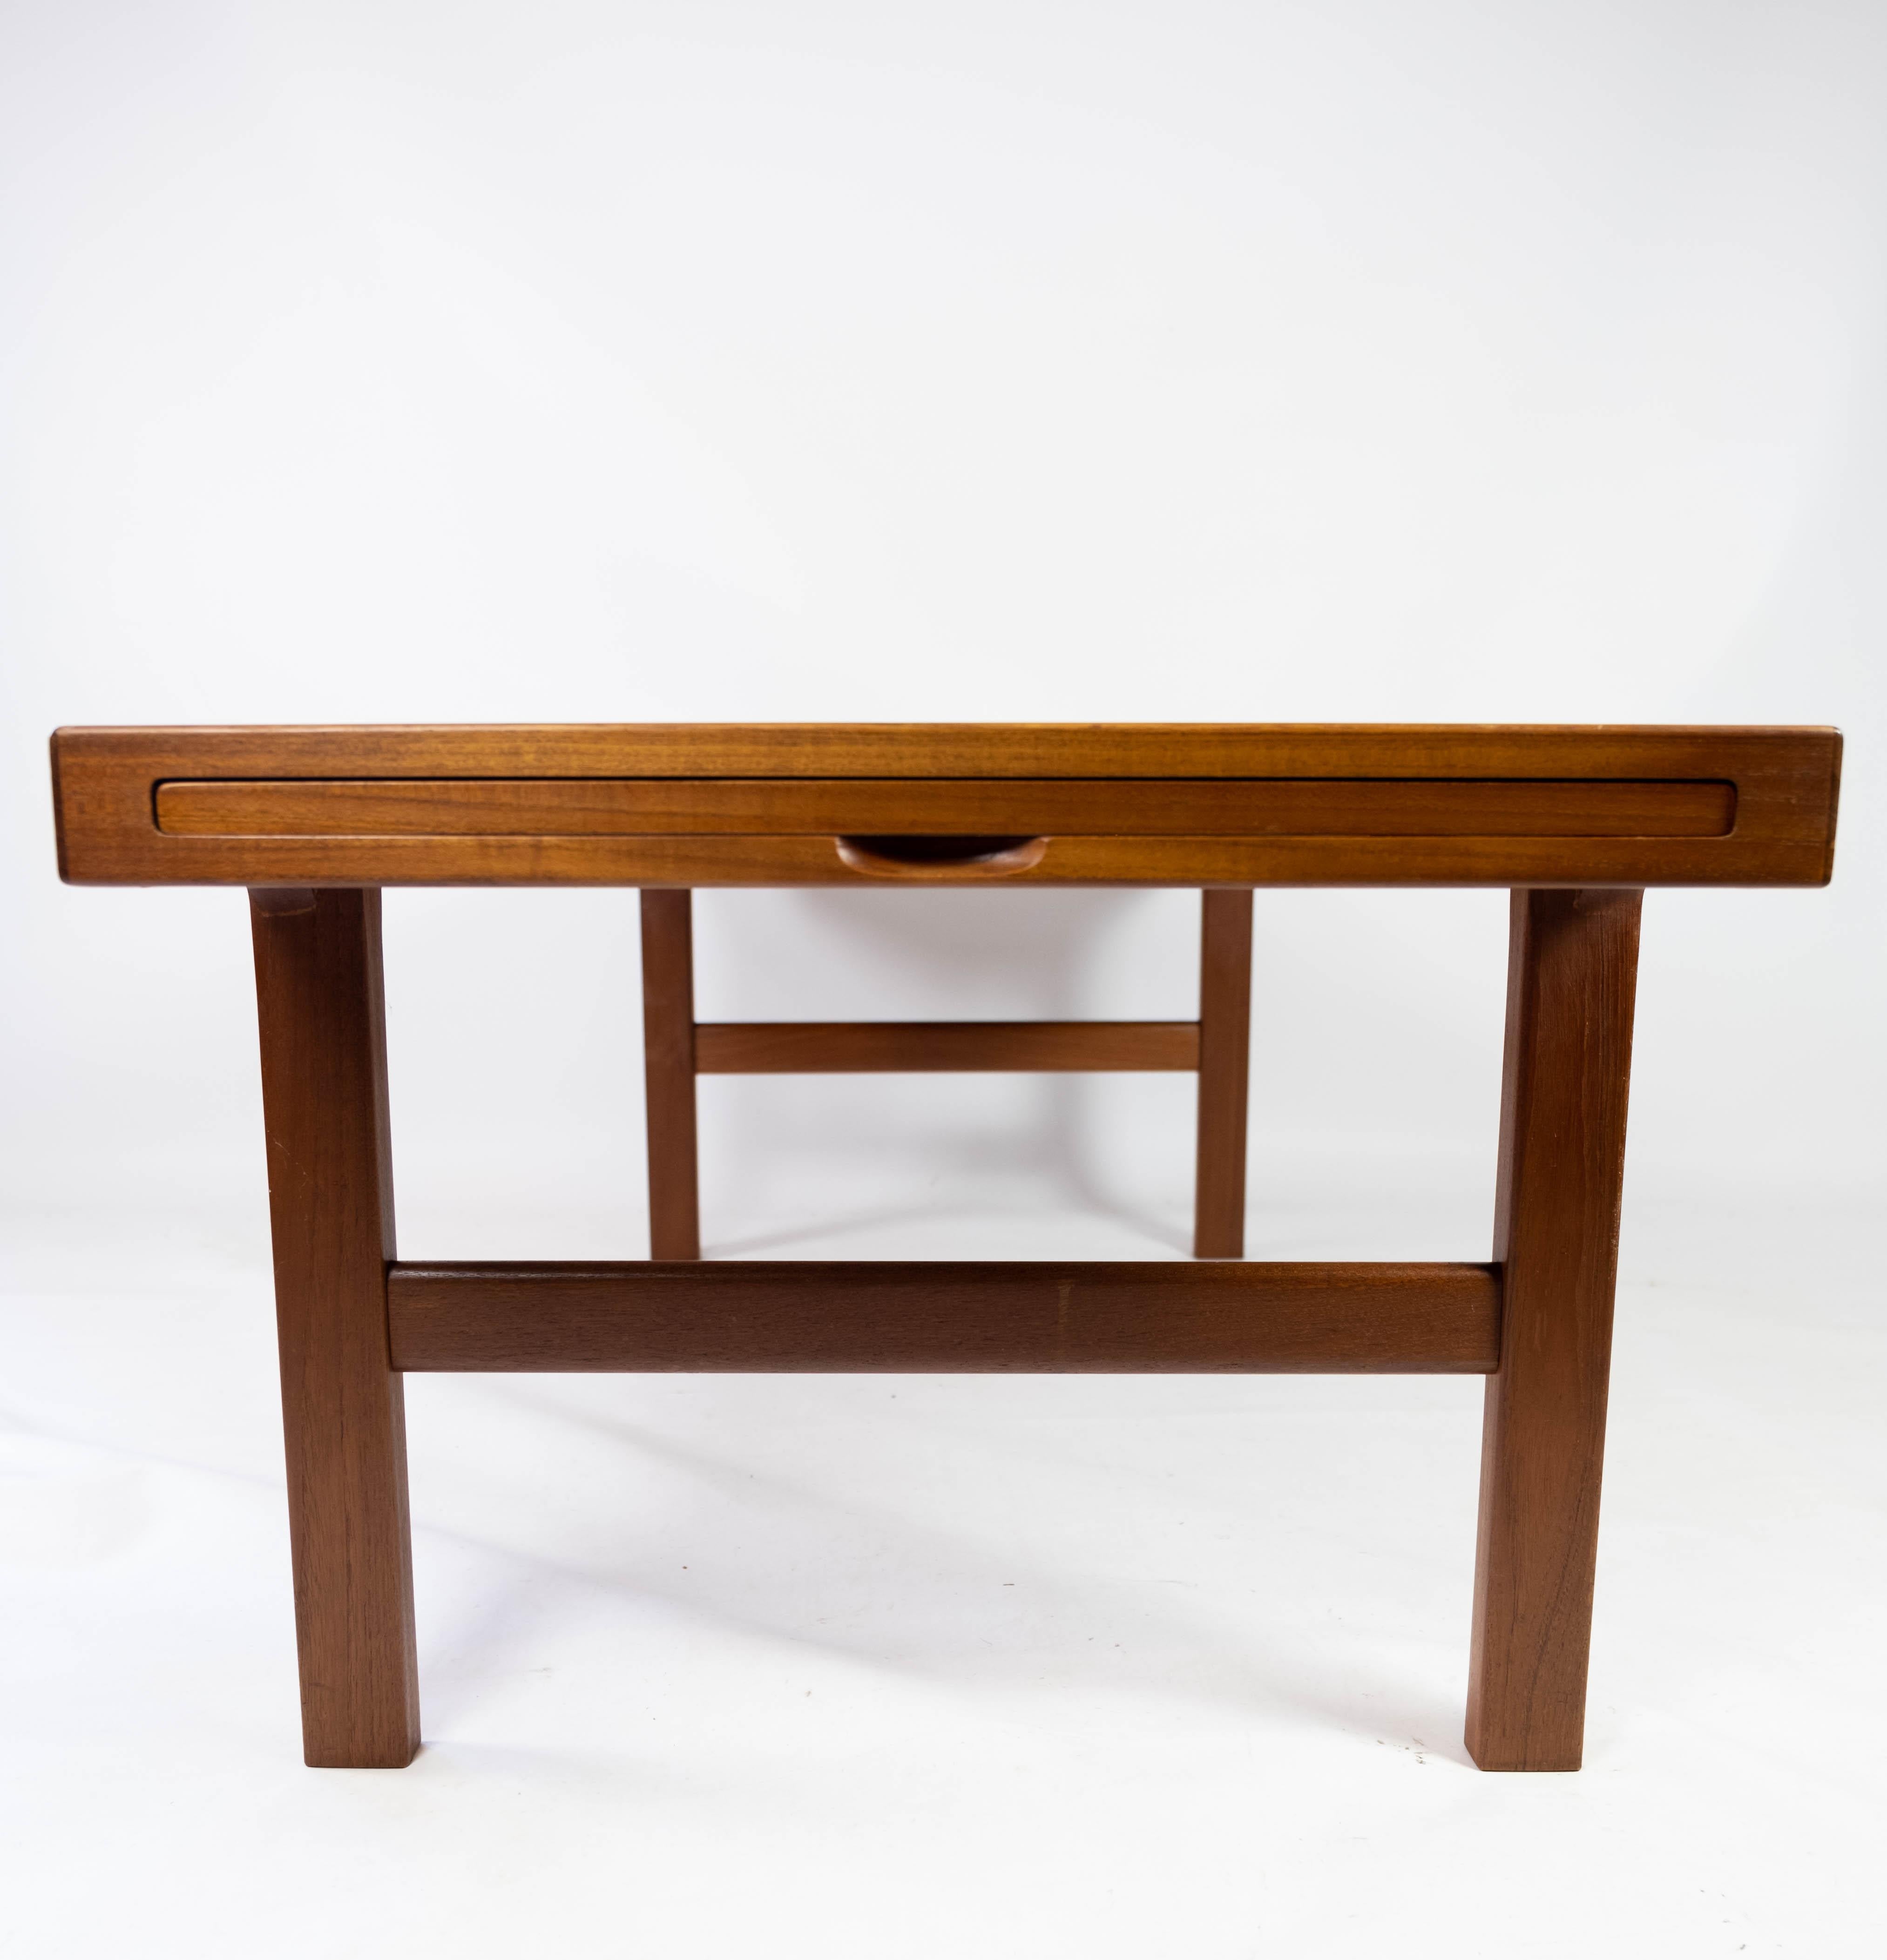 Coffee Table Made In Teak With Extension Plate, Danish Design From 1960s For Sale 5